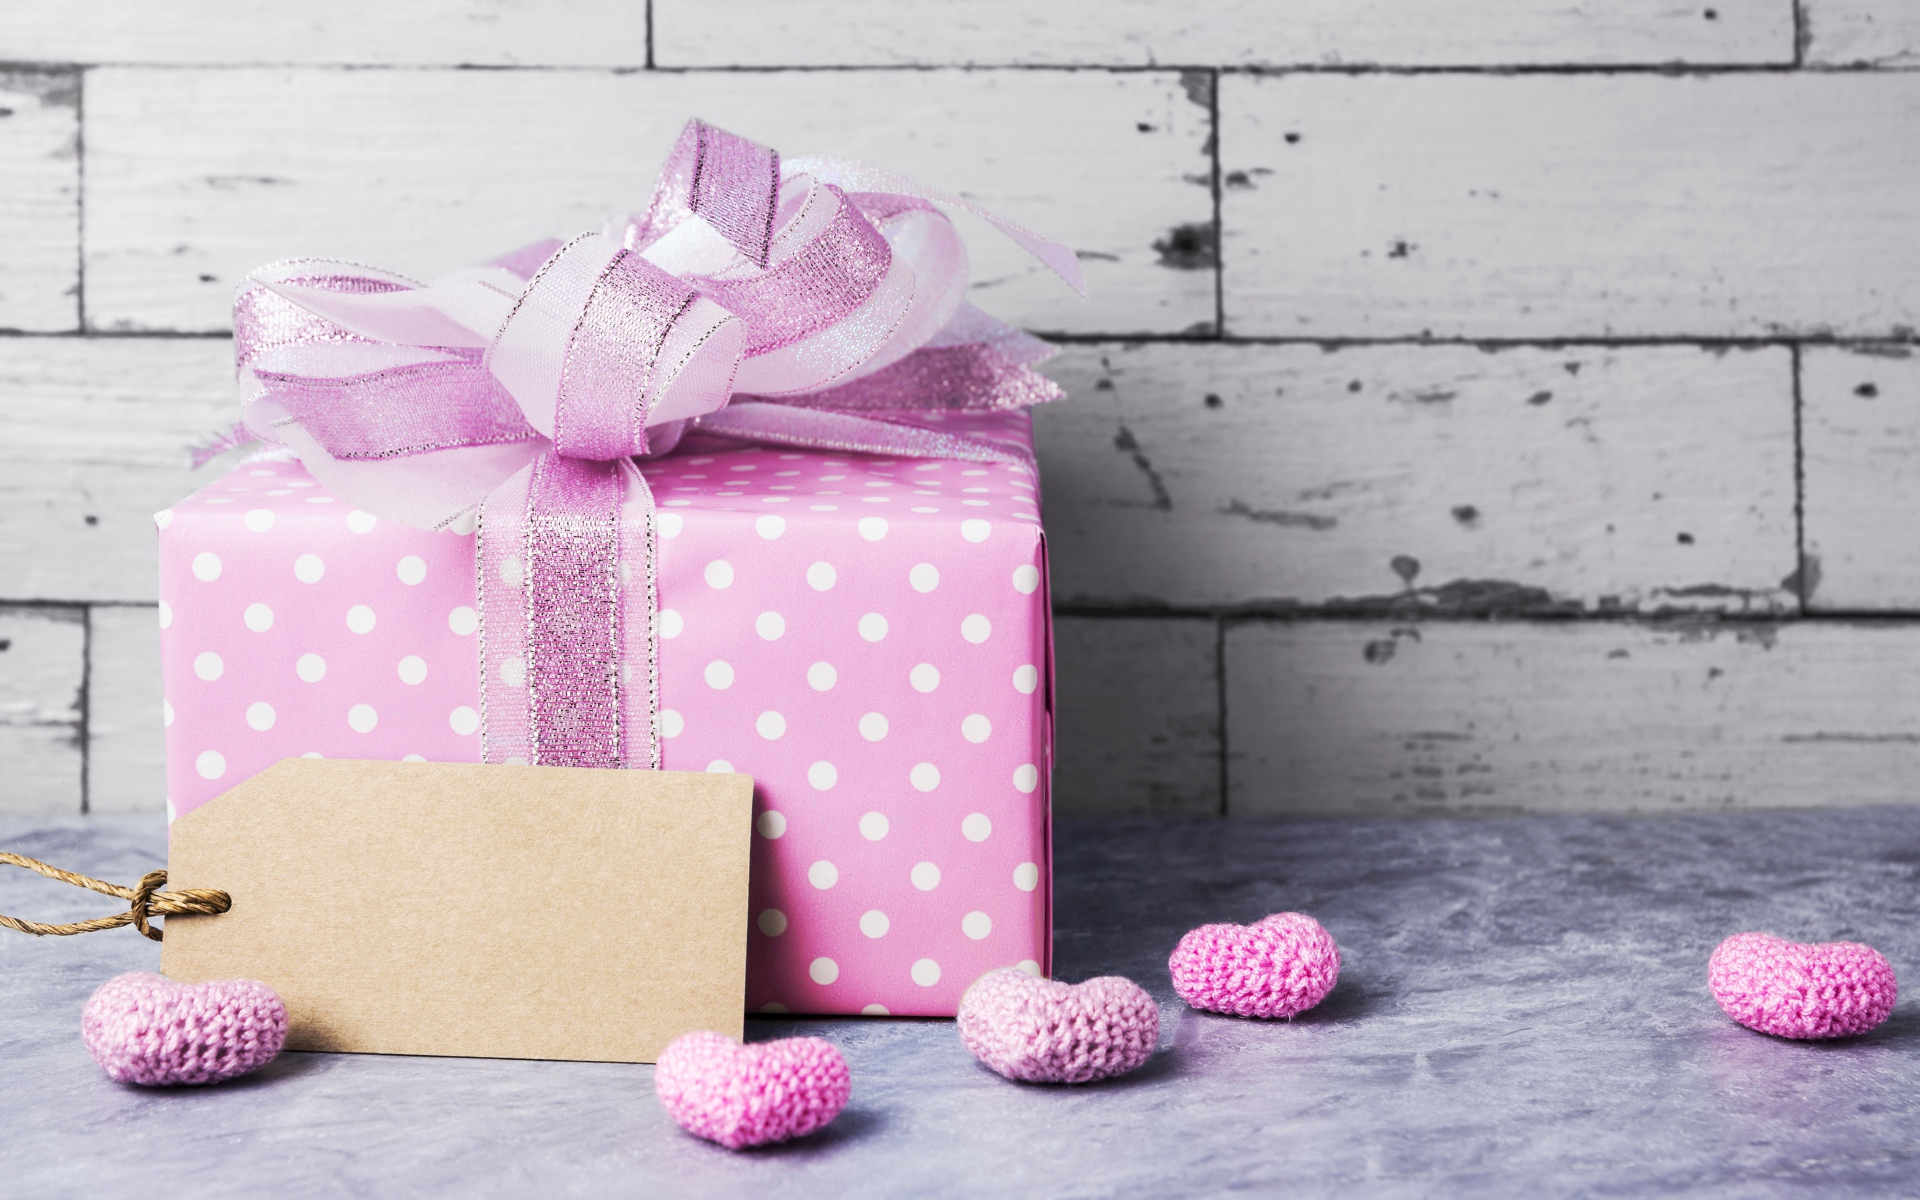 Large lilac gift box with a bow and small hearts against the wall